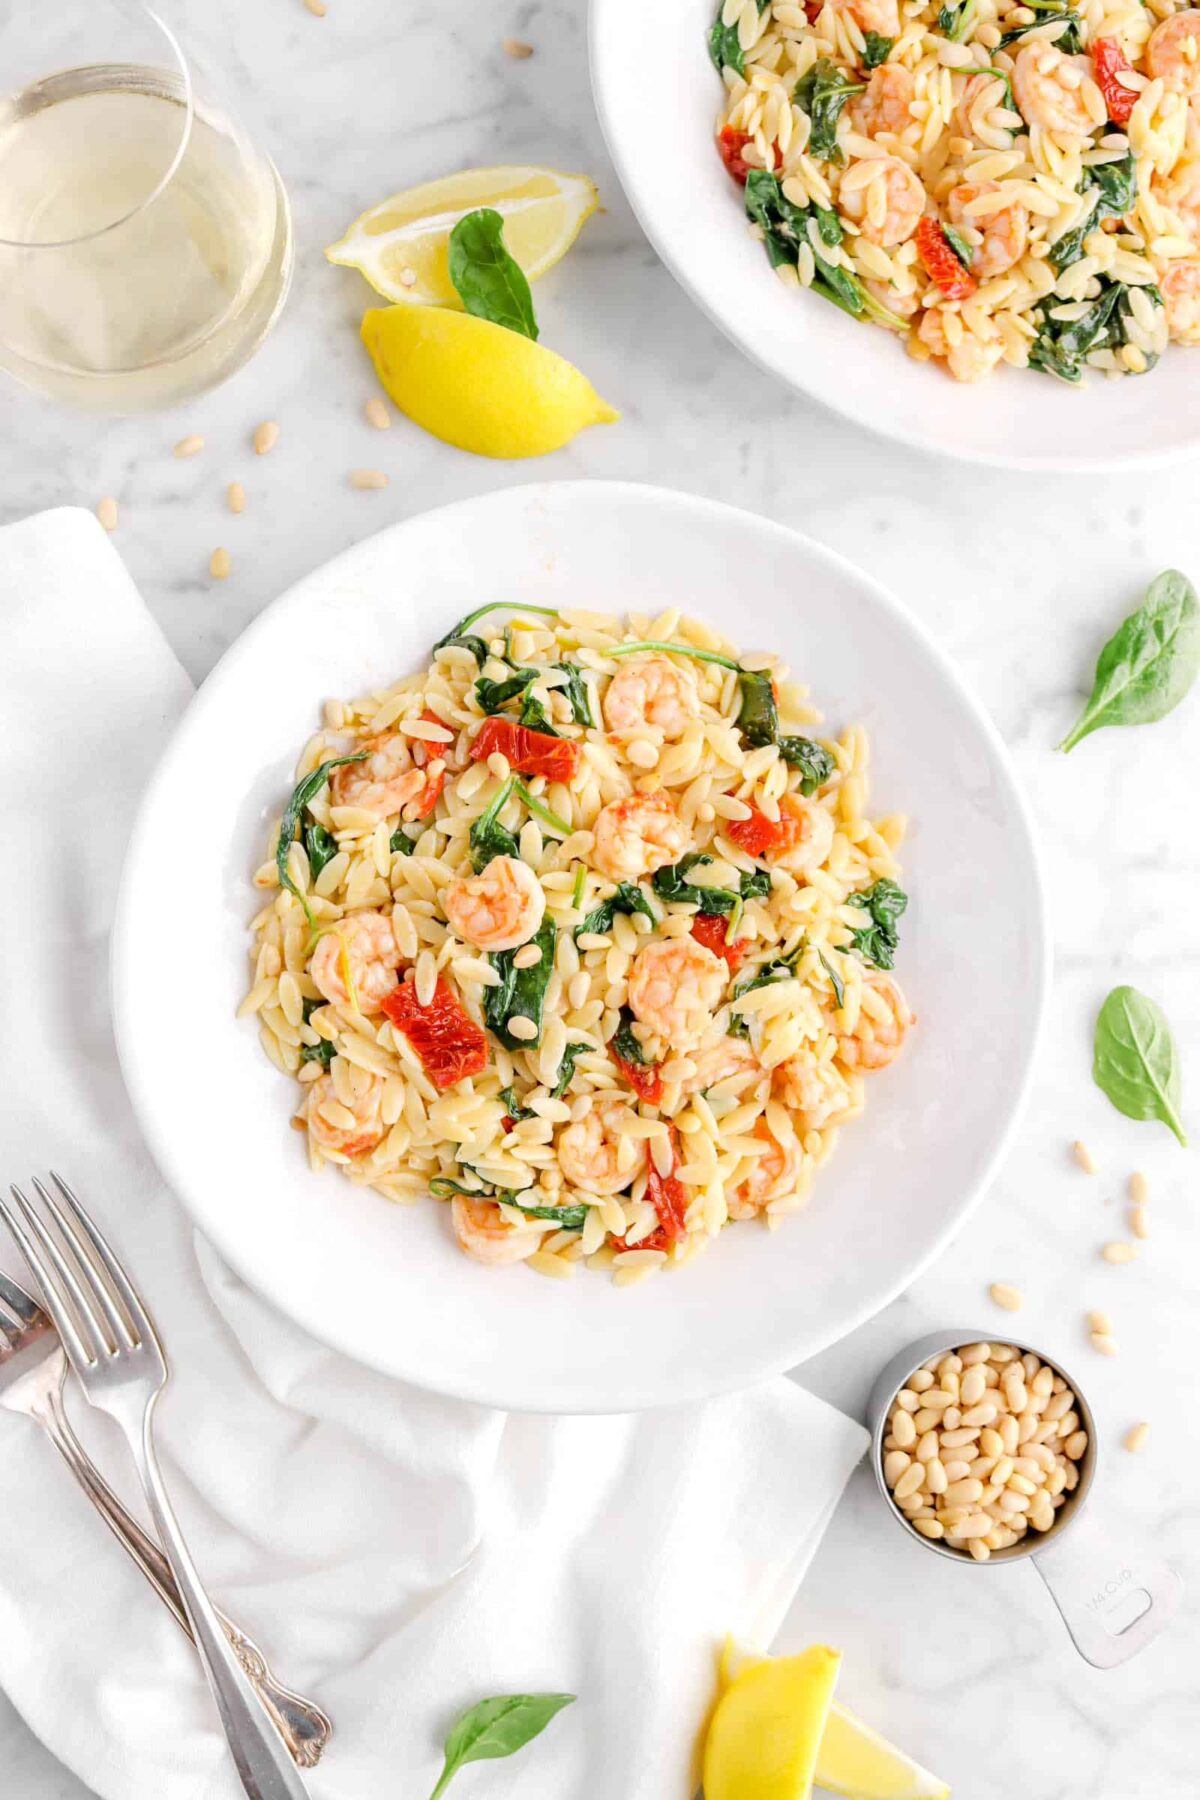 shrimp orzo in plate with forks, spinach leaves, pine nuts, and lemon wedges around